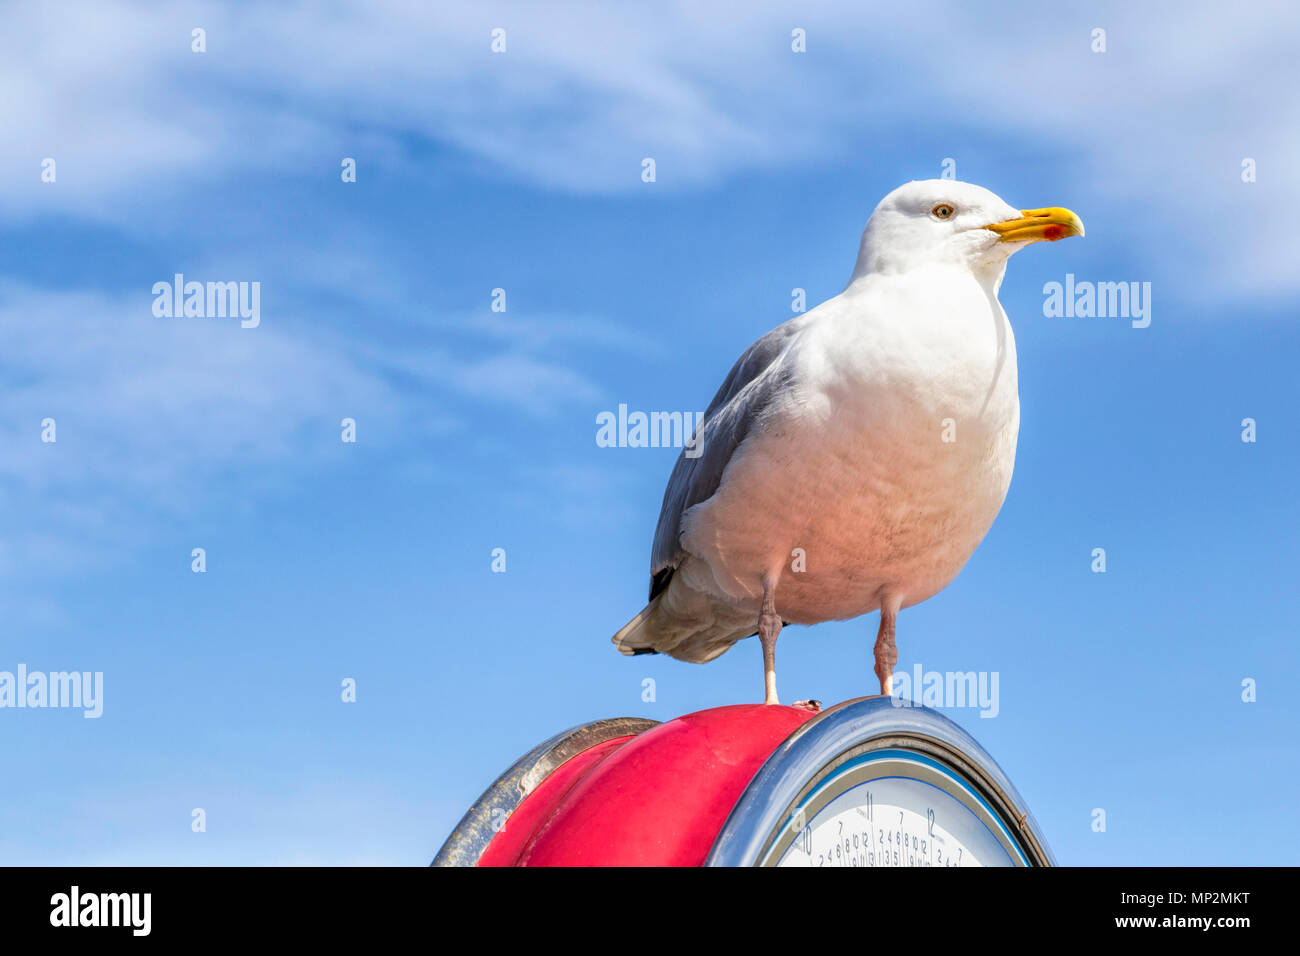 Lesser black-backed gull perched on top of a vintage weighing scales on Llandudno Pier, a poplur seaside venue in North Wales, United Kingdom. Stock Photo